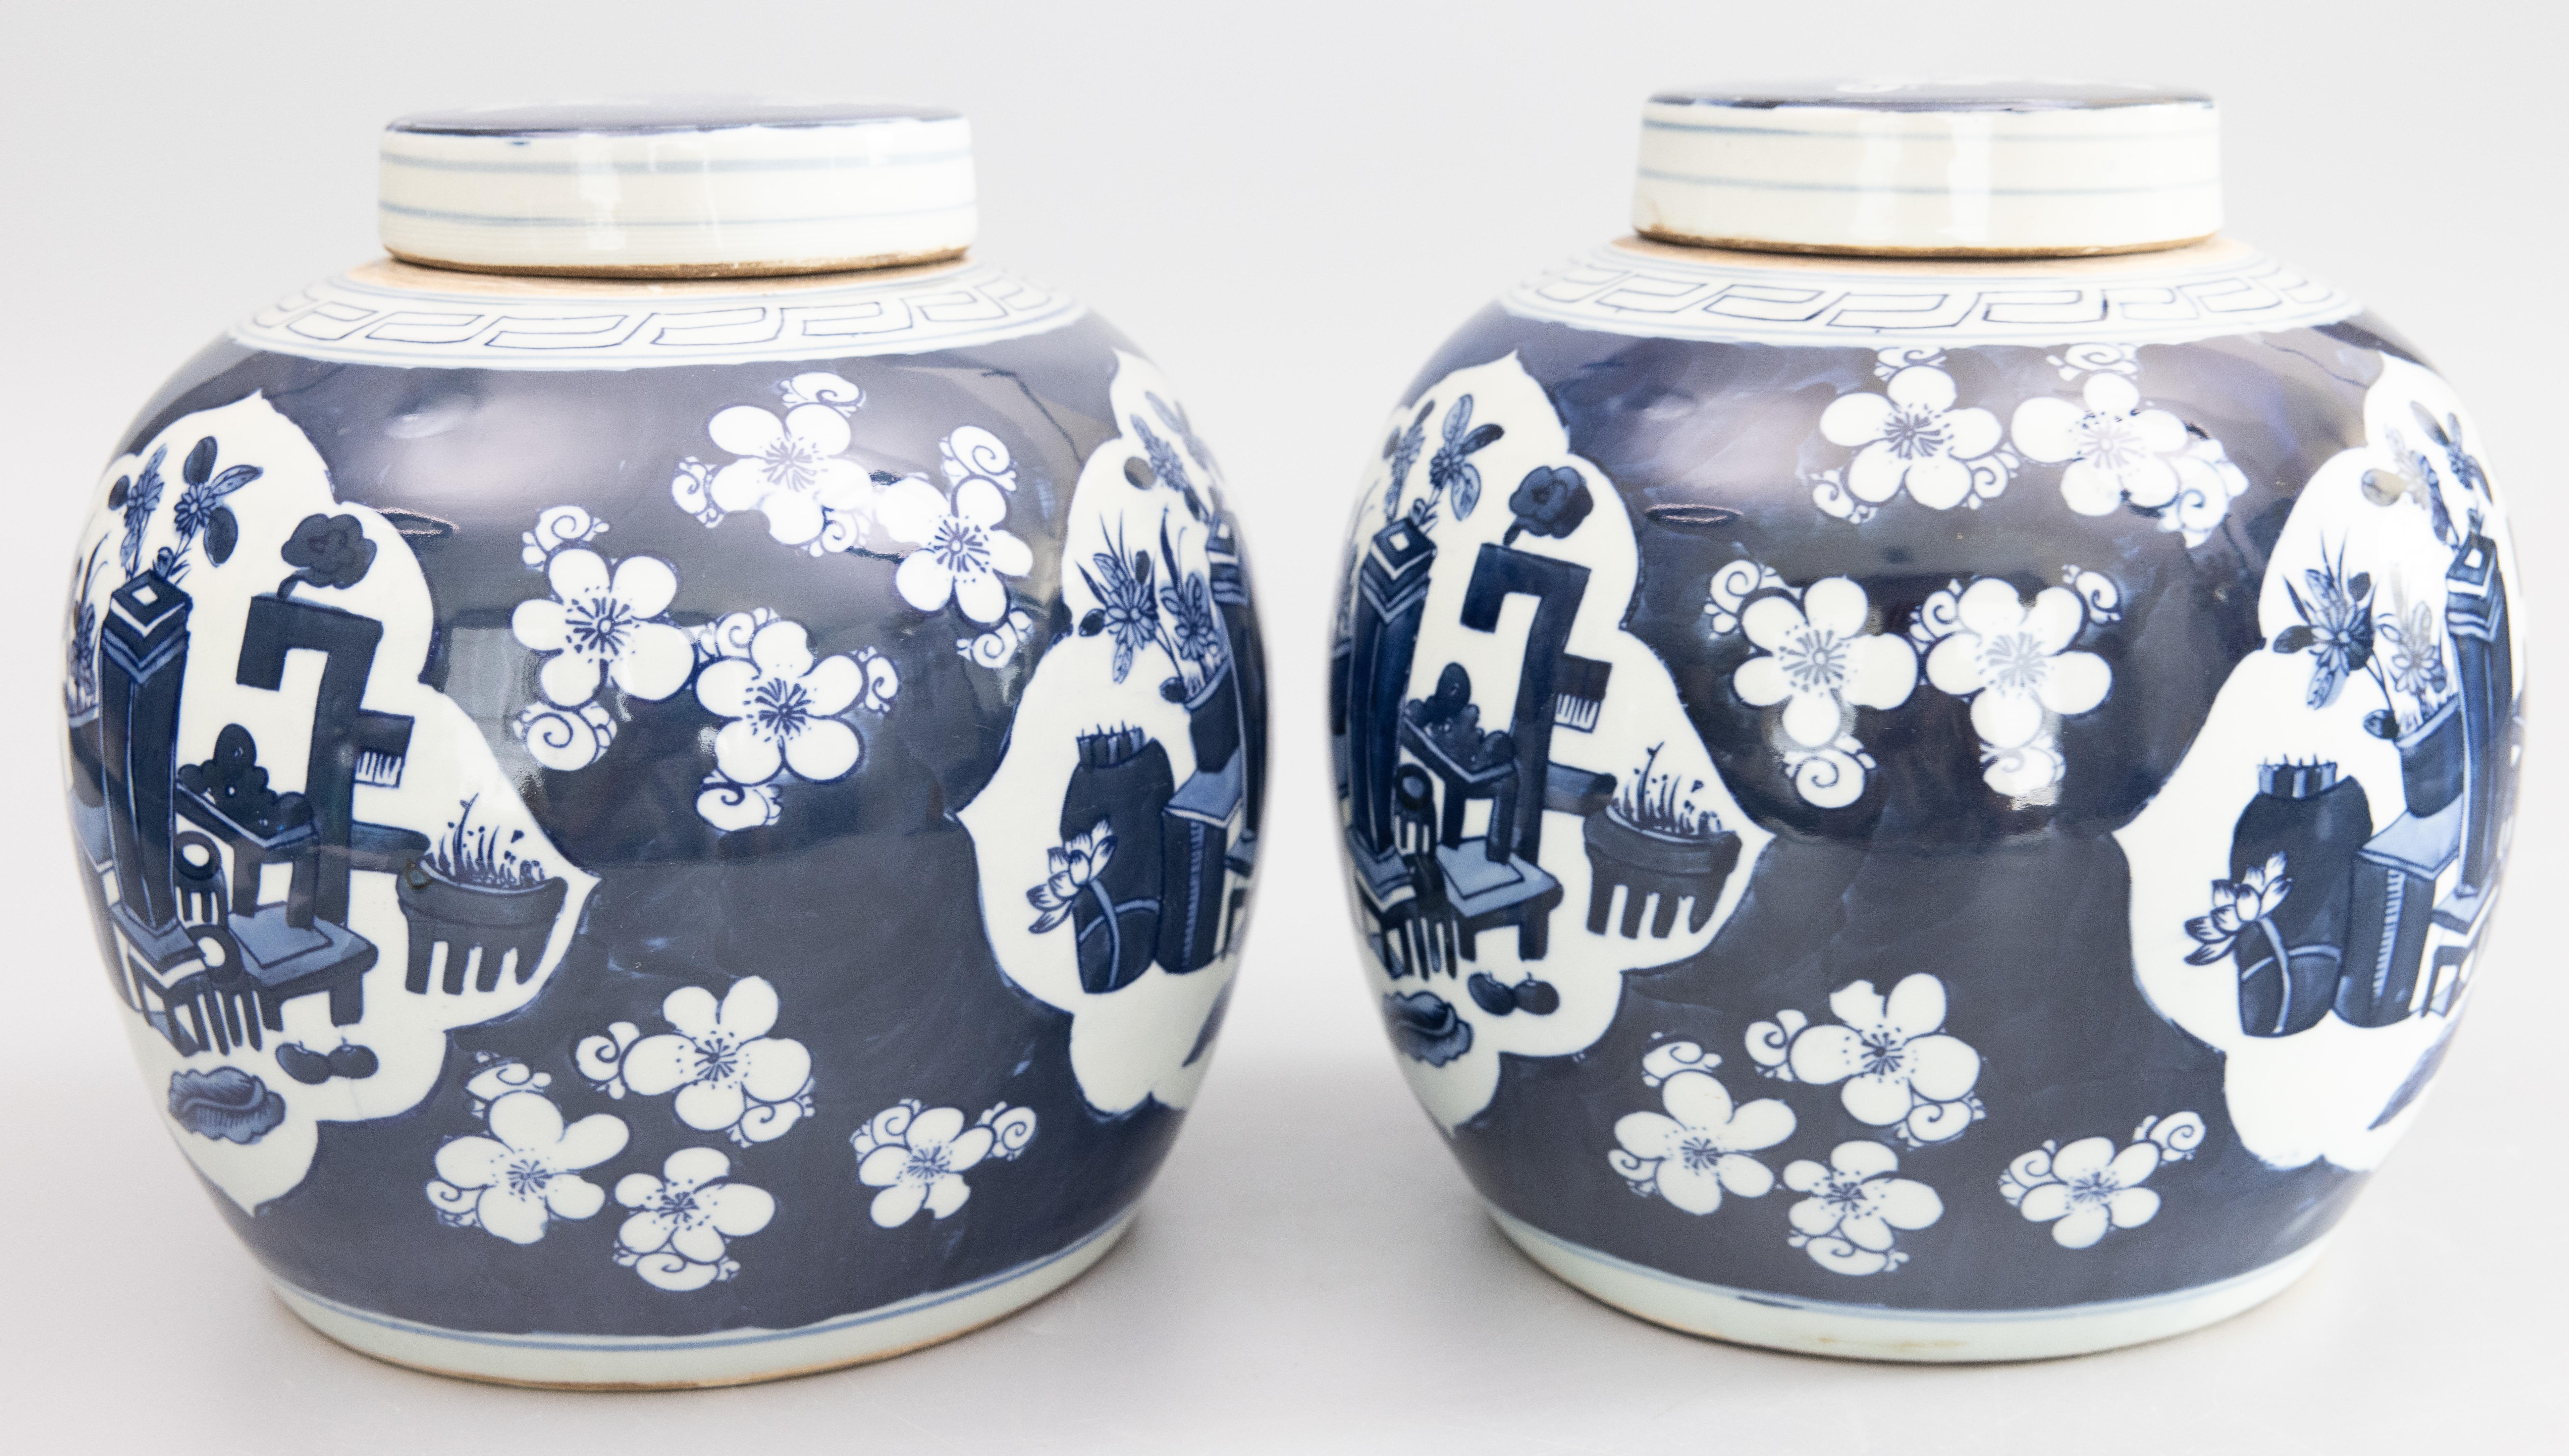 A lovely pair of vintage Chinese Kangxi style handmade ceramic lidded ginger jars hand painted in vibrant cobalt blue and white. These fabulous jars are decorated with flower pots in a patio scene surrounded by a cherry blossom floral motif.